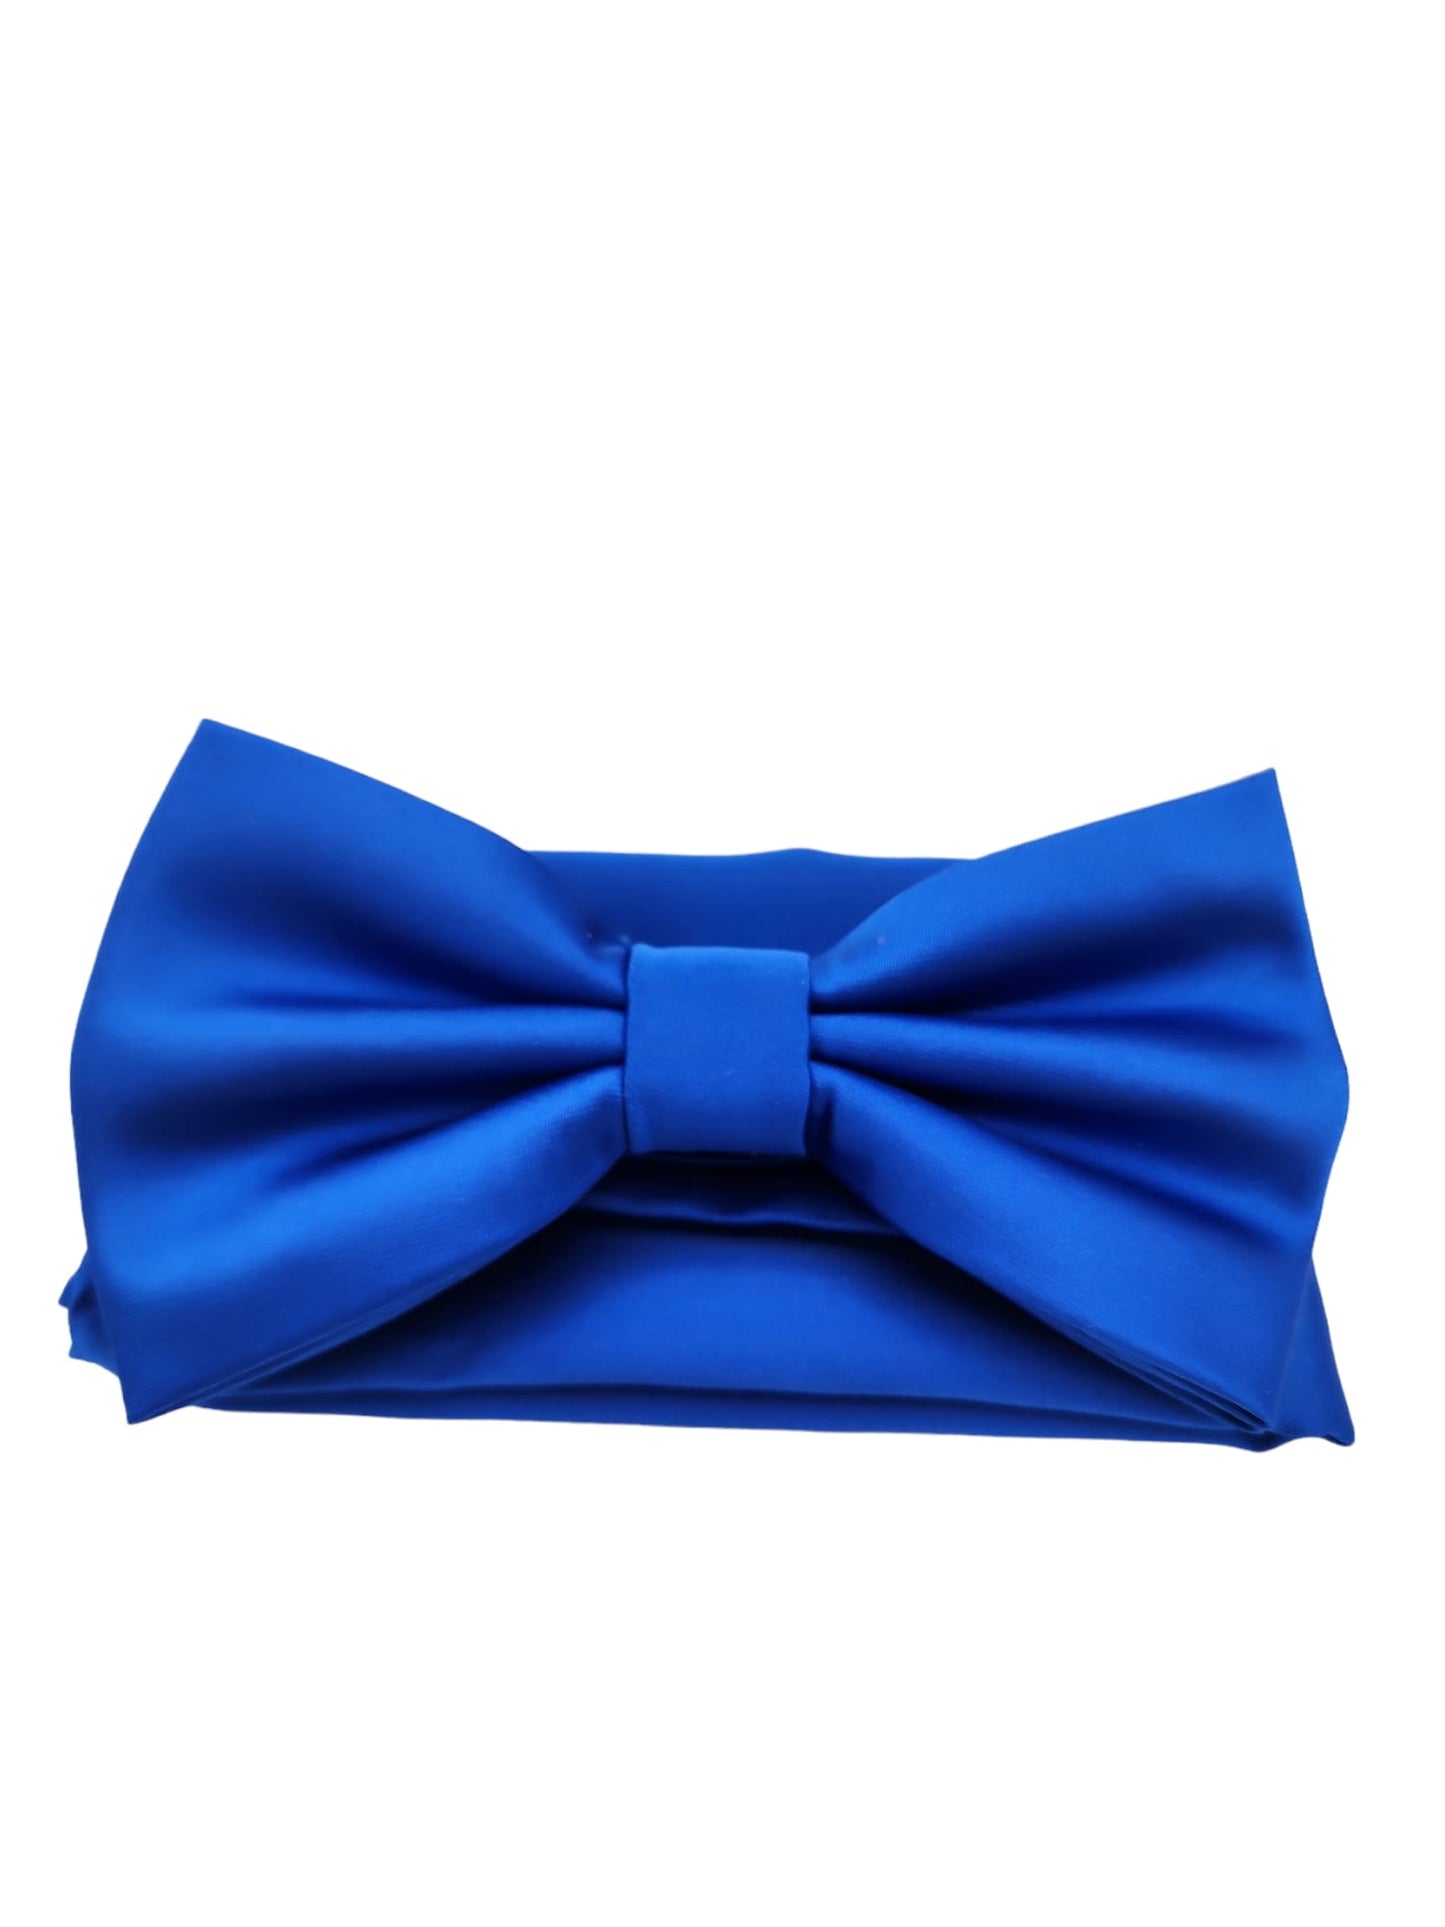 Giovanni Testi Classic Royal Blue Bow Tie with Hanky BT100-EE